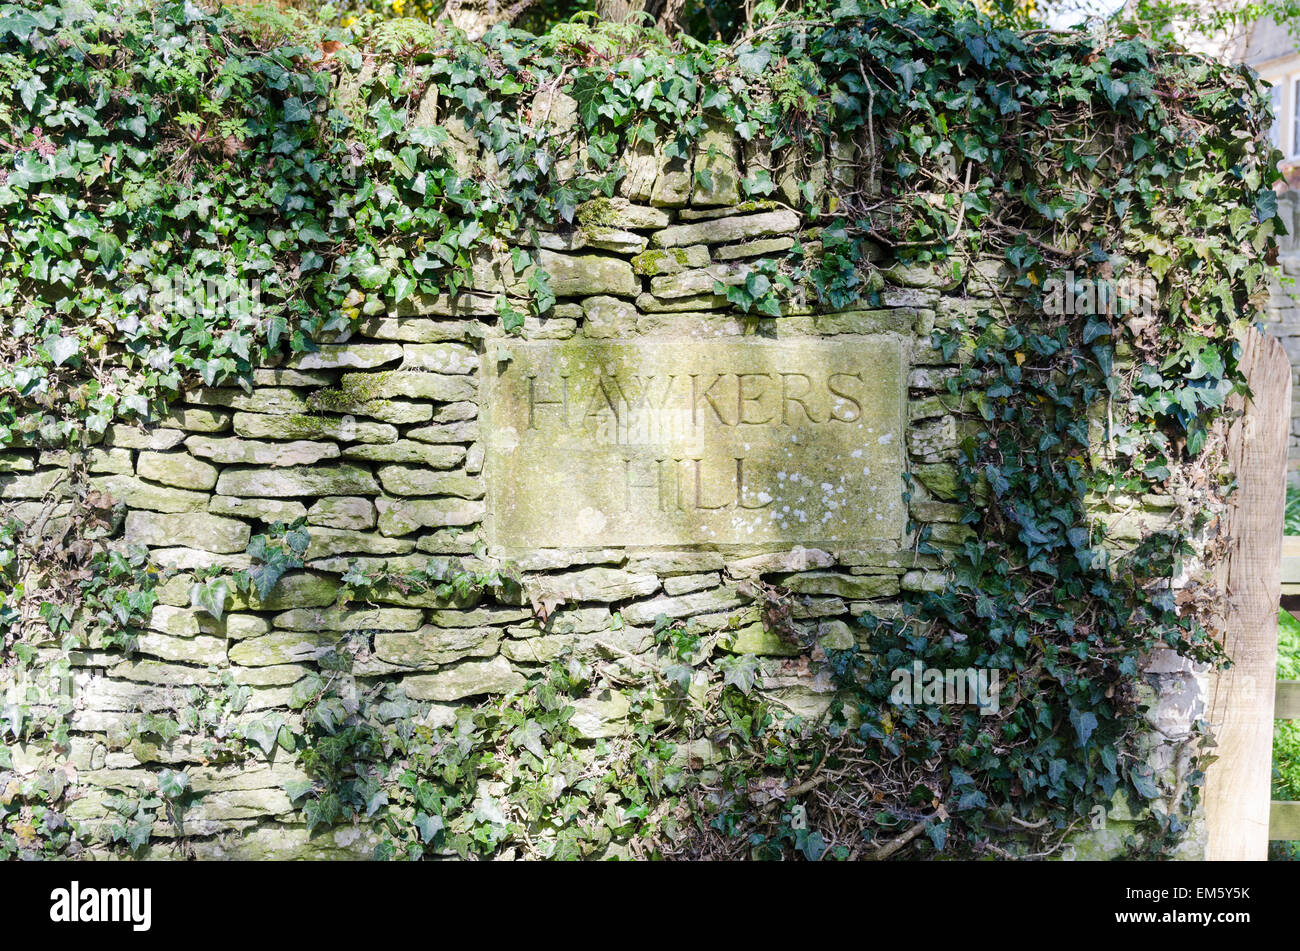 Stone street sign for Hawkers Hill embedded in stone wall in Bibury near Cirencester Stock Photo